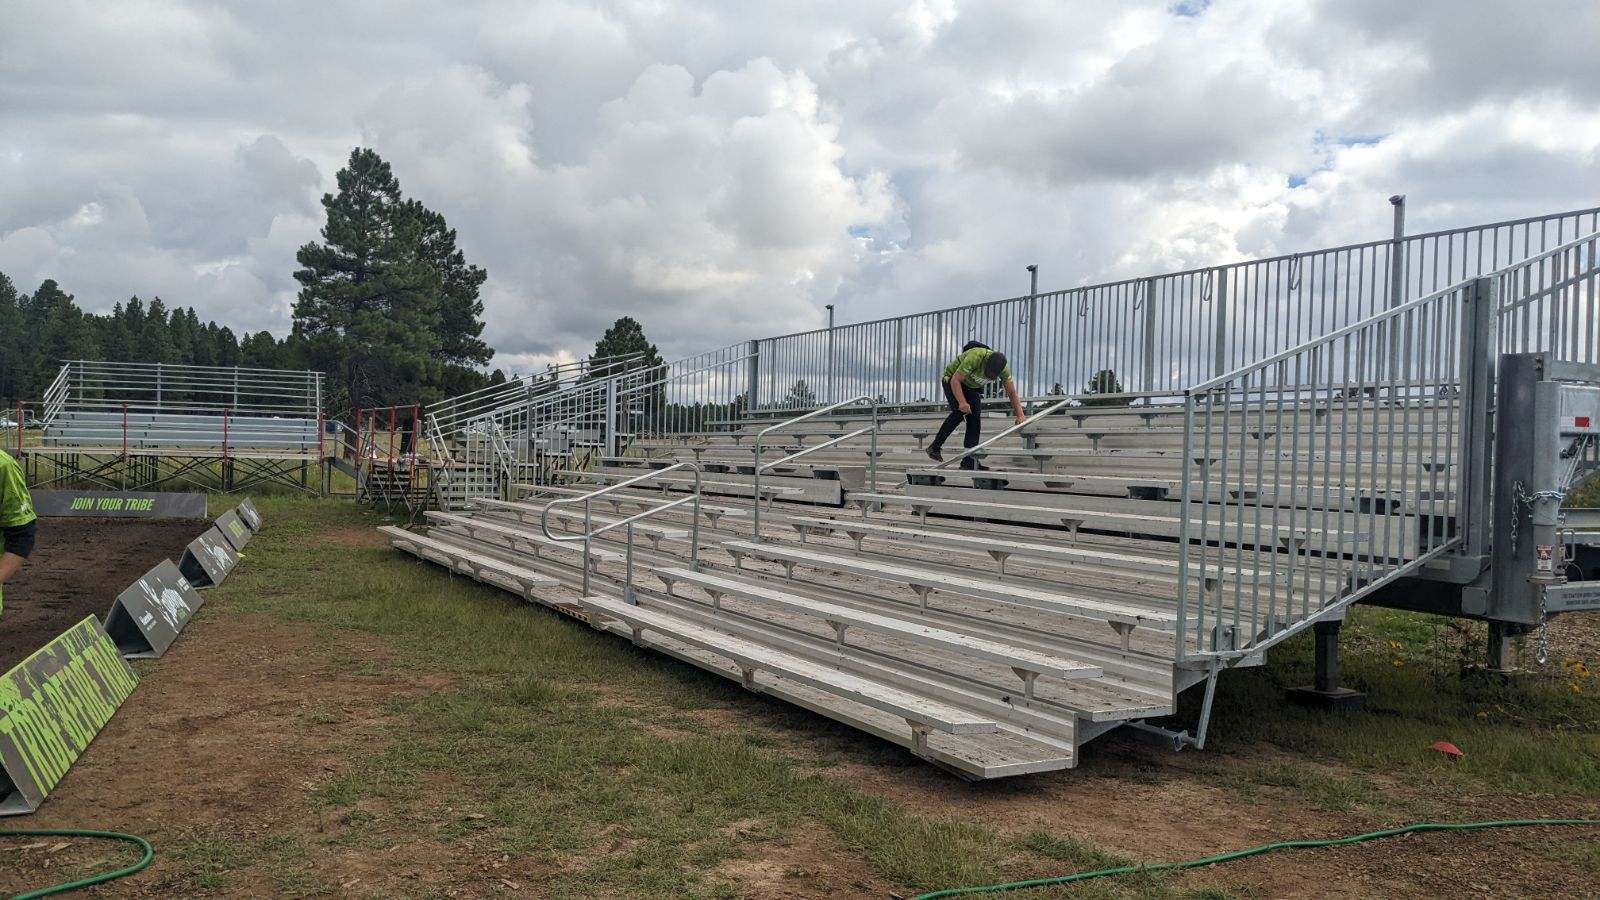 Towable grandstand bleachers at Survivor Weekend at Camp Raymond in Parks, Arizona.